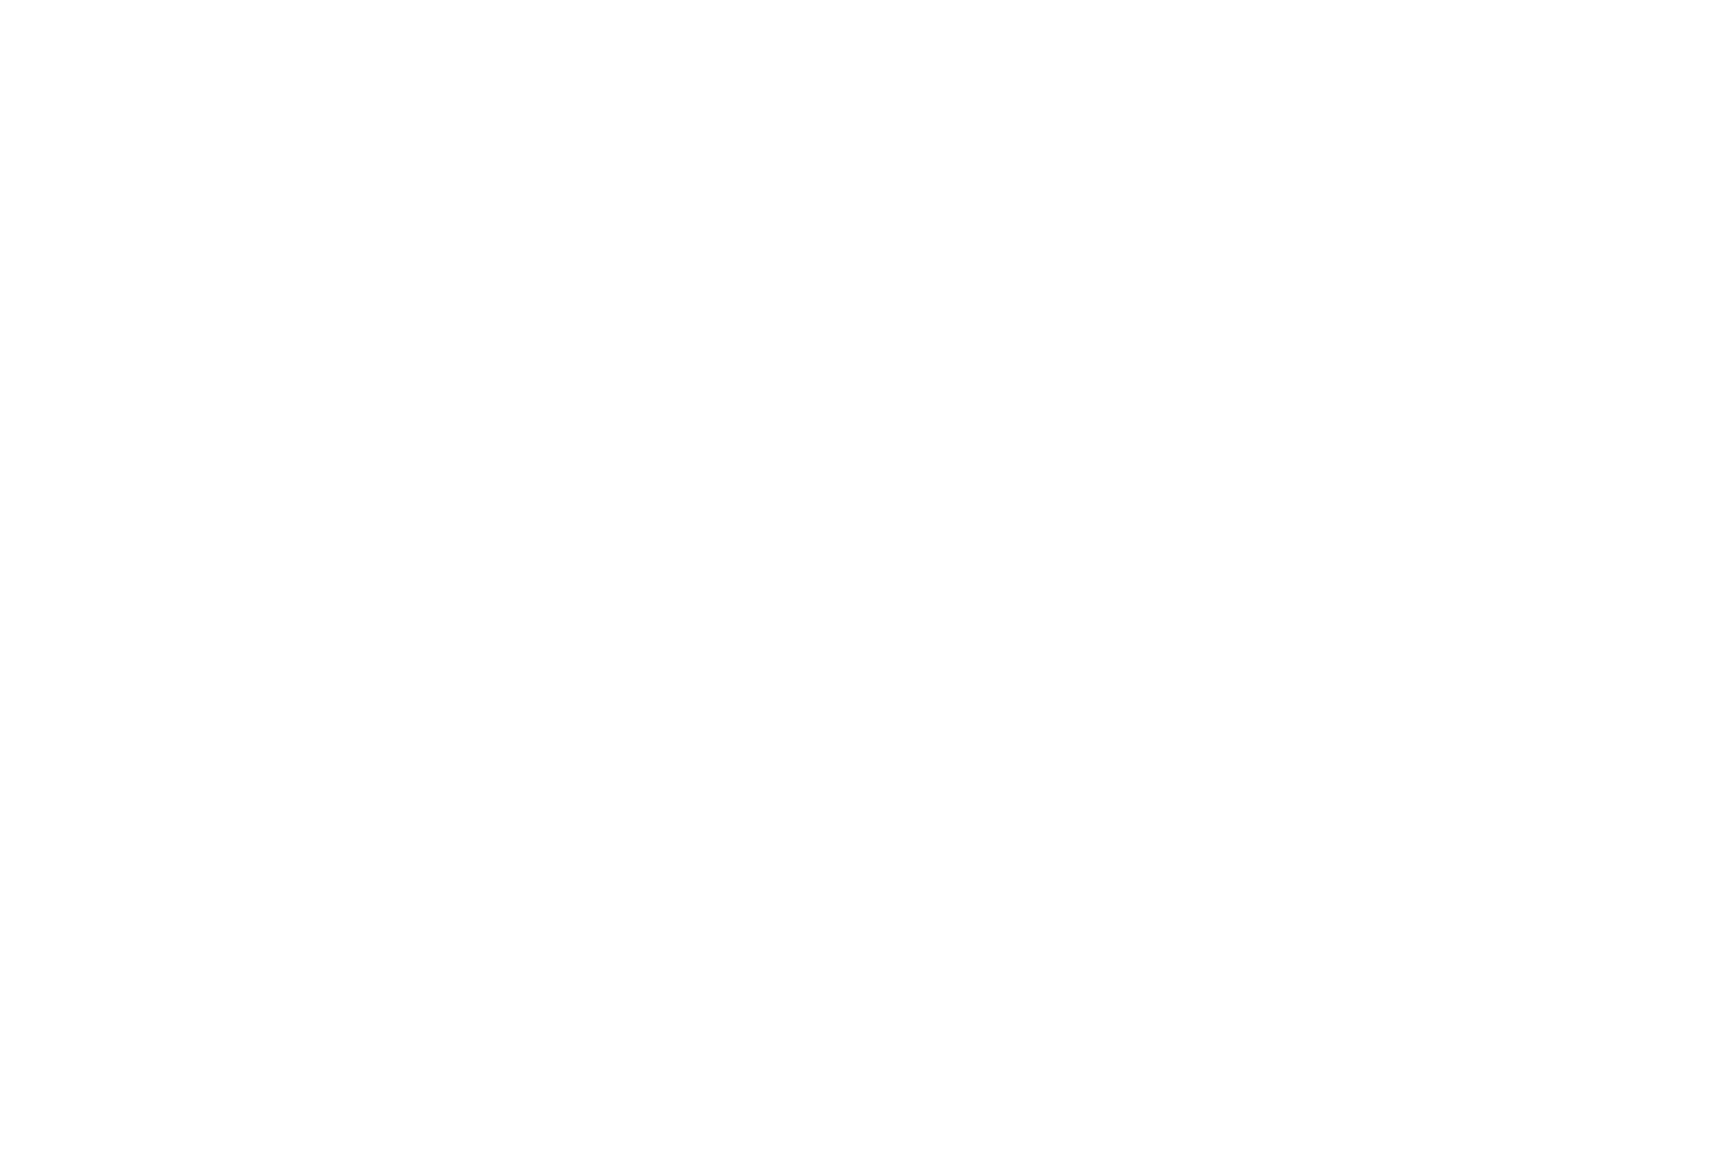 OFFICIAL SELECTION - 4th Dimension - Event 27 March Independent Film Festival - 2023